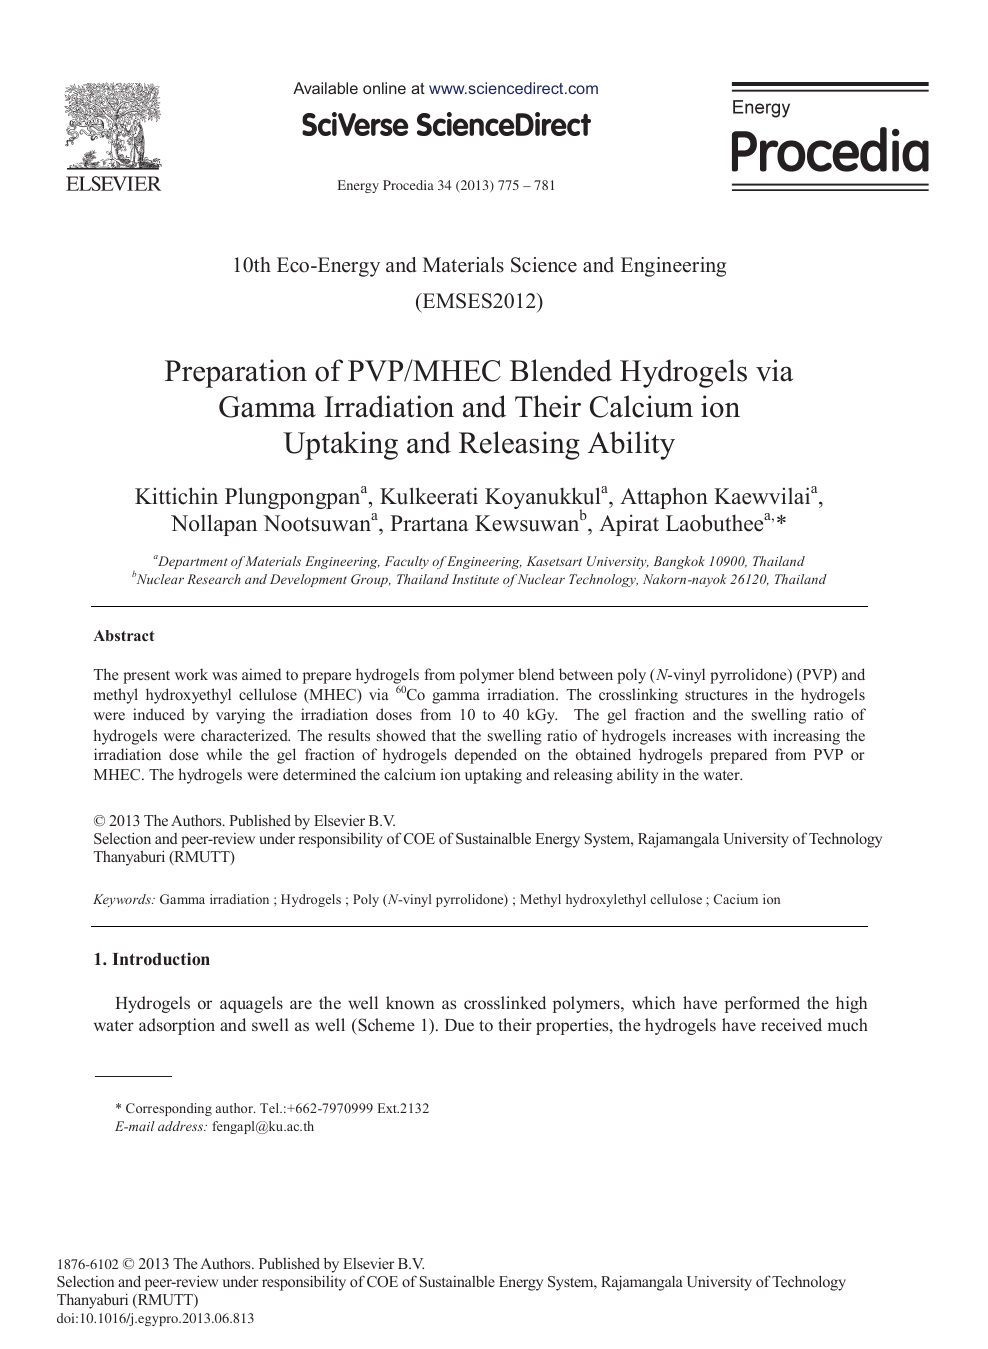 Preparation Of Pvp Mhec Blended Hydrogels Via Gamma Irradiation And Their Calcium Ion Uptaking And Releasing Ability Topic Of Research Paper In Materials Engineering Download Scholarly Article Pdf And Read For Free